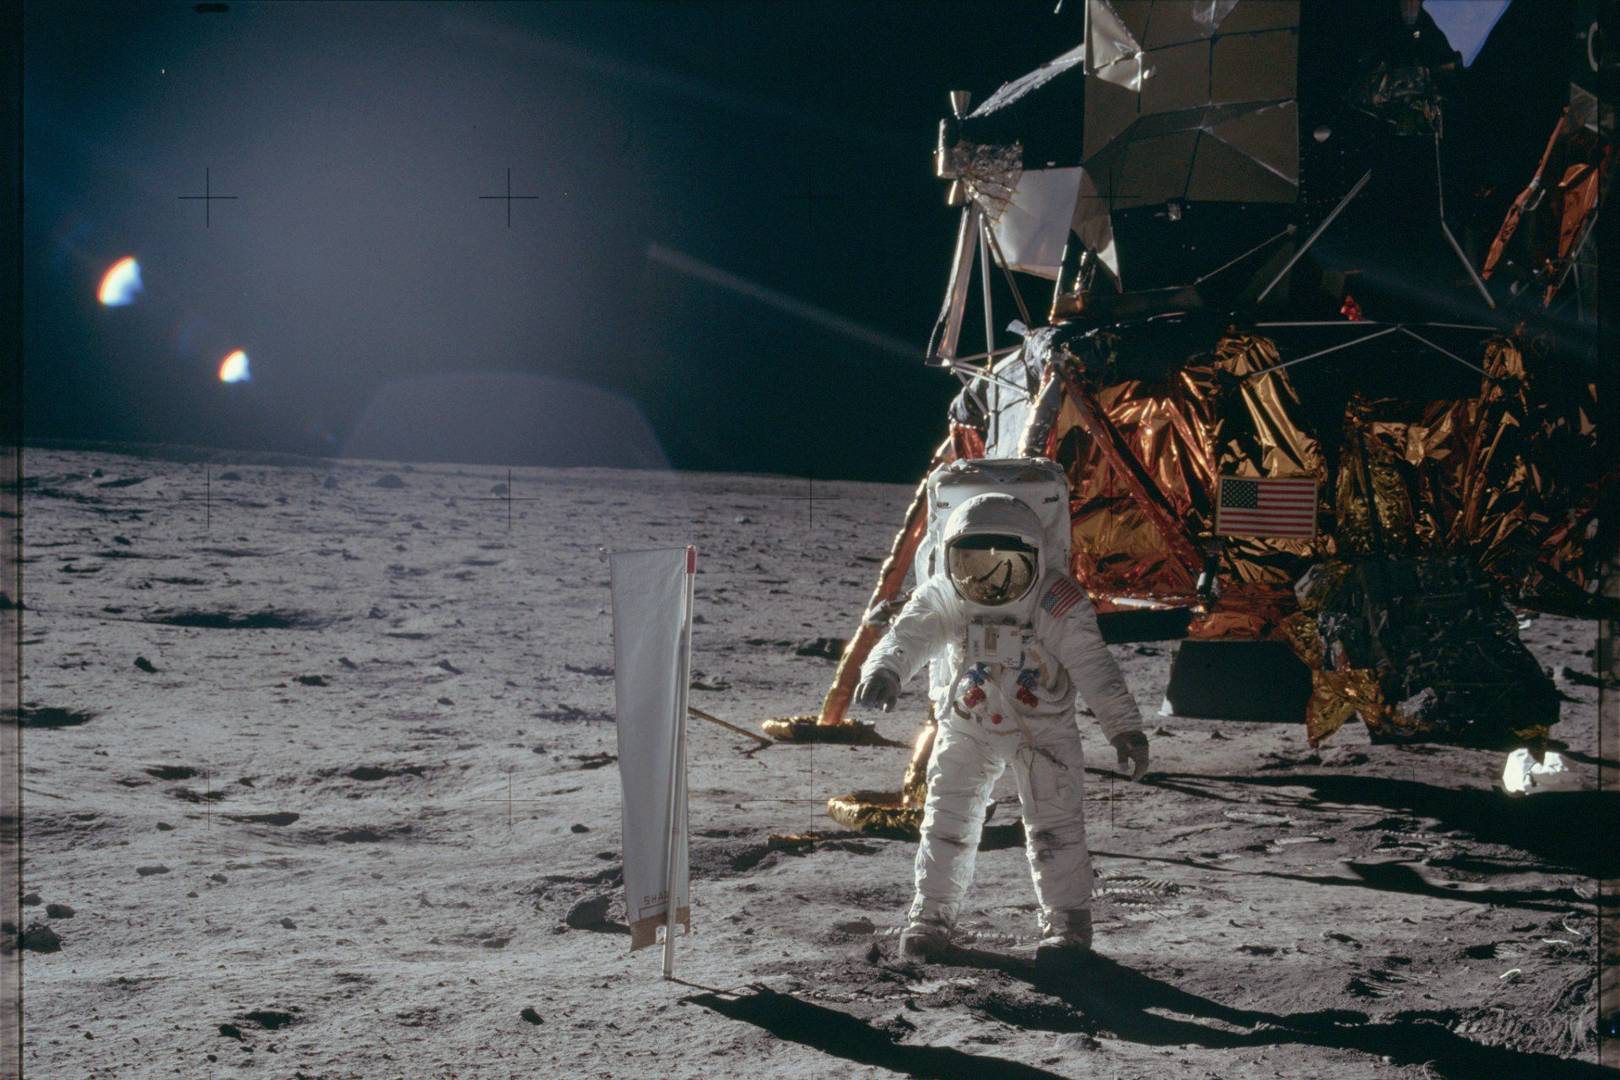 The 19 best image from Nasa's Apollo missions